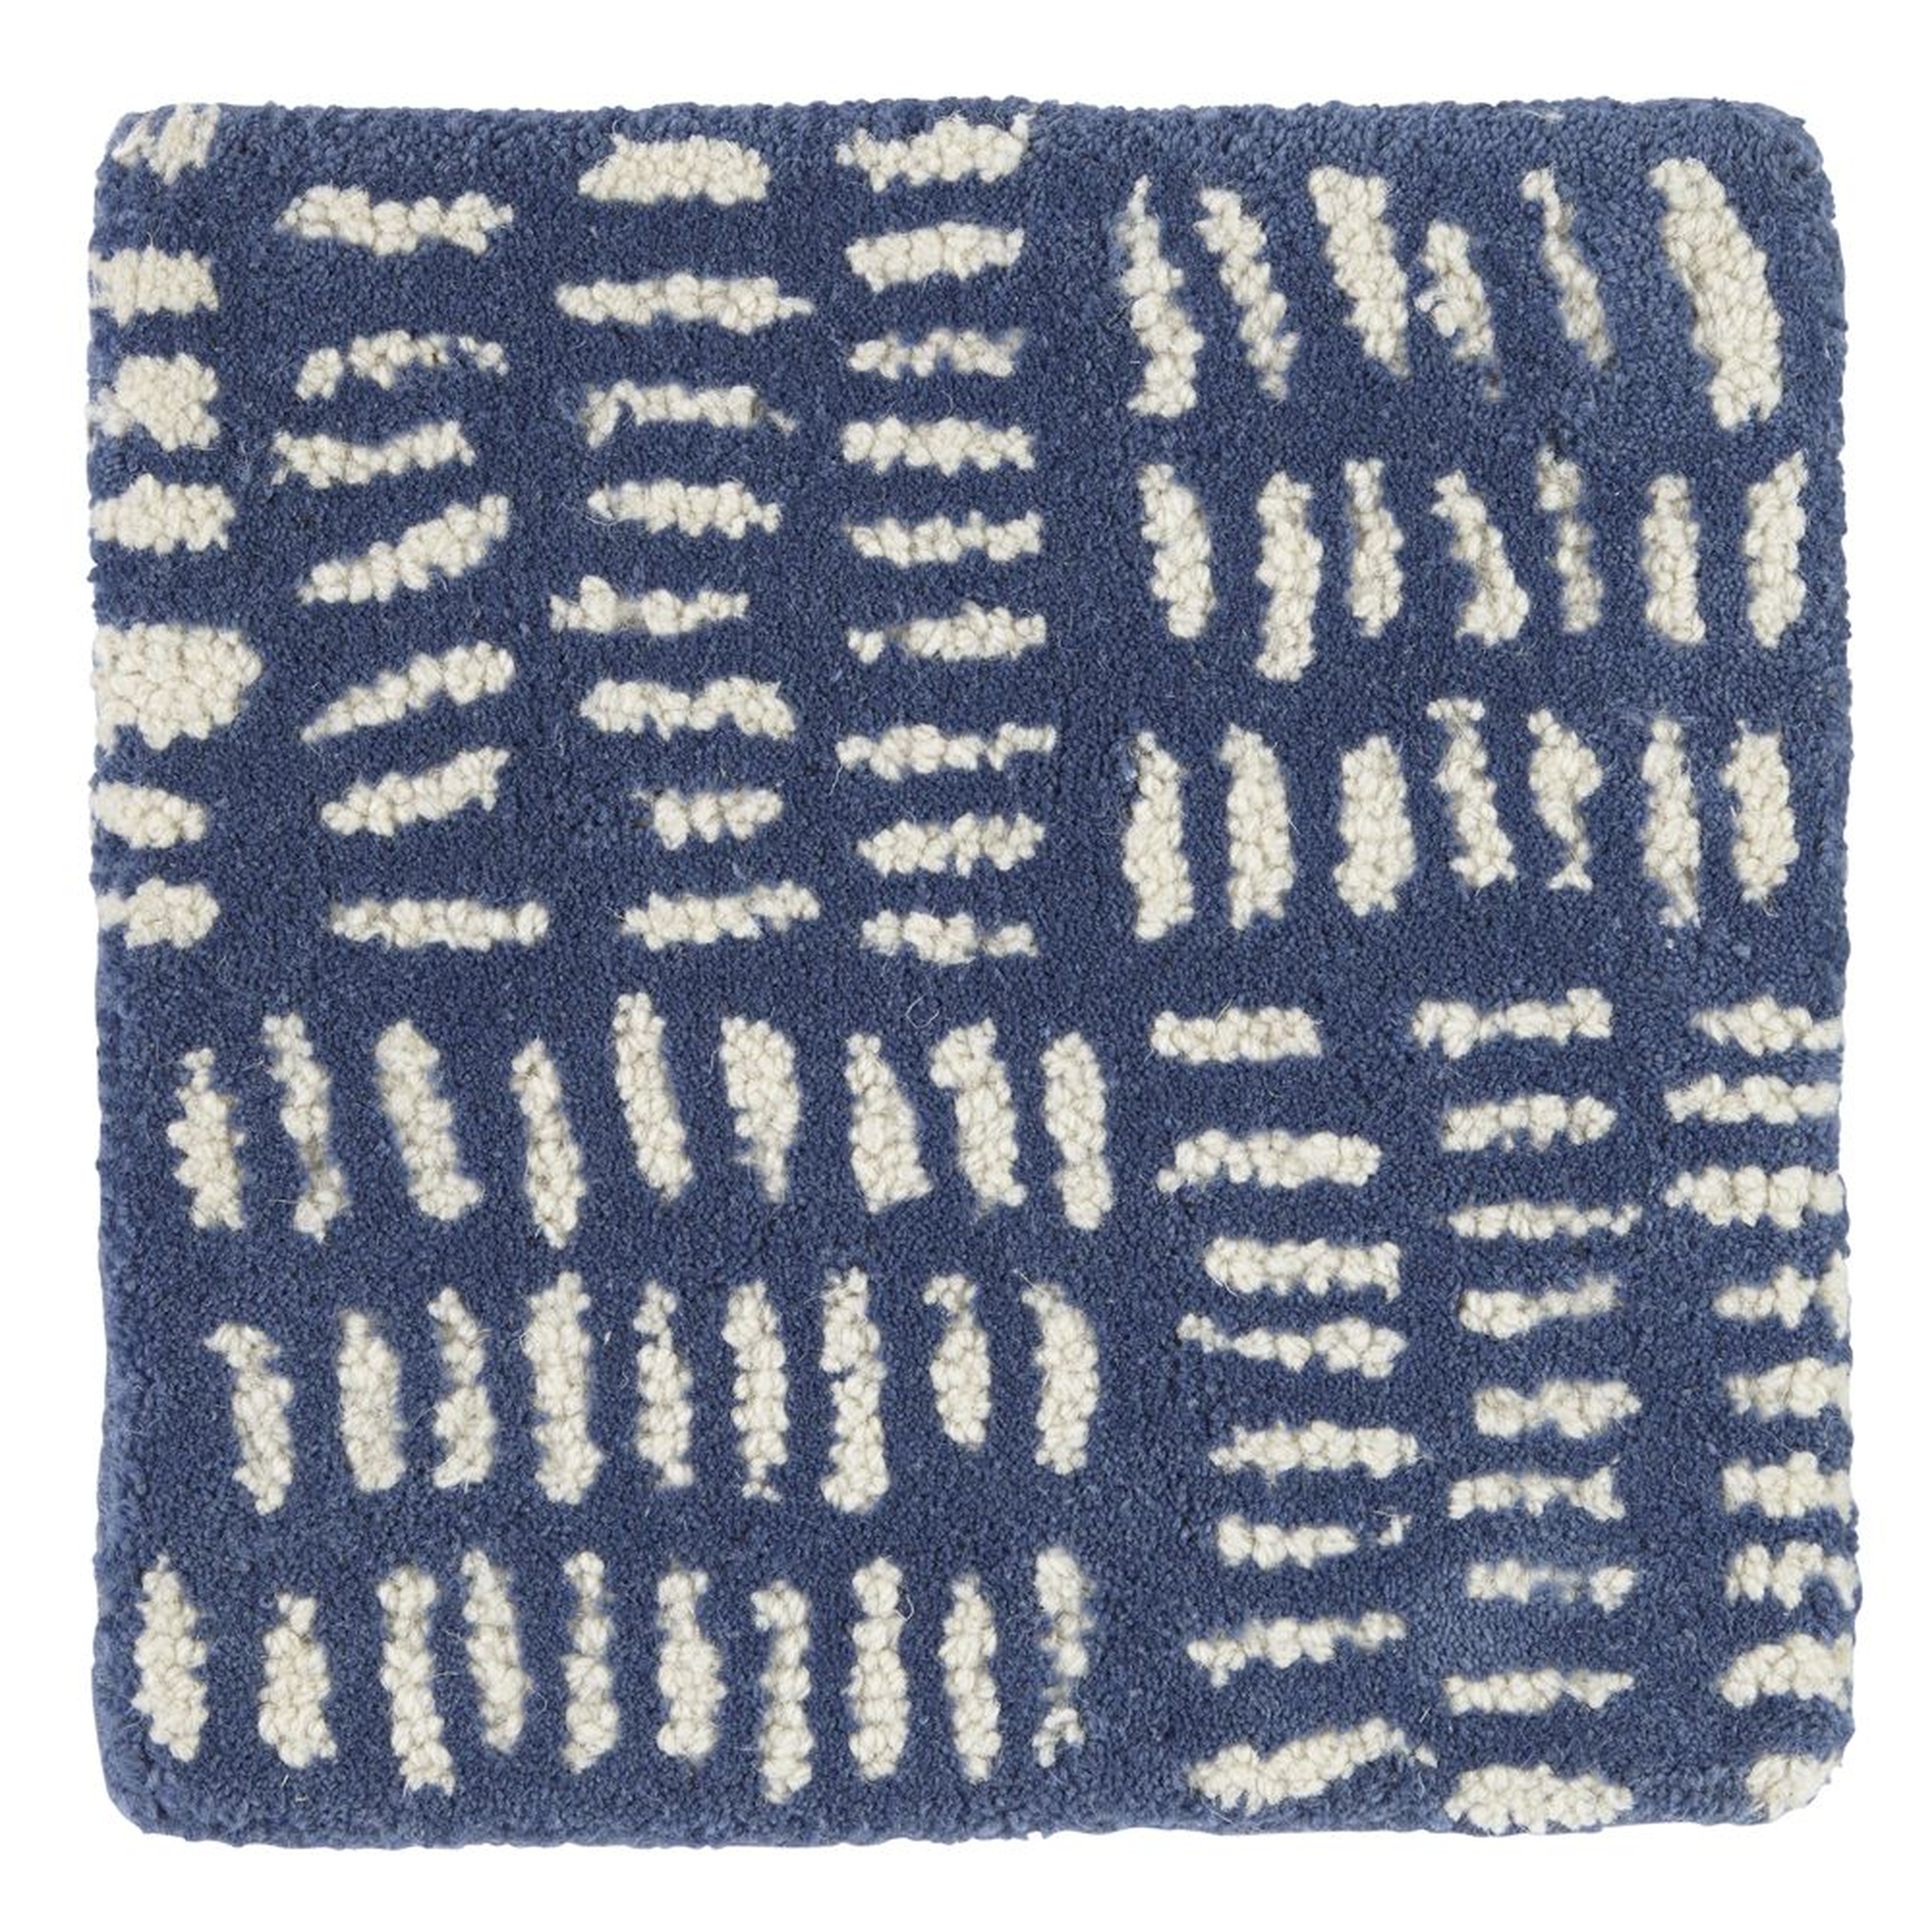 Tally Blue Rug Swatch - Crate and Barrel